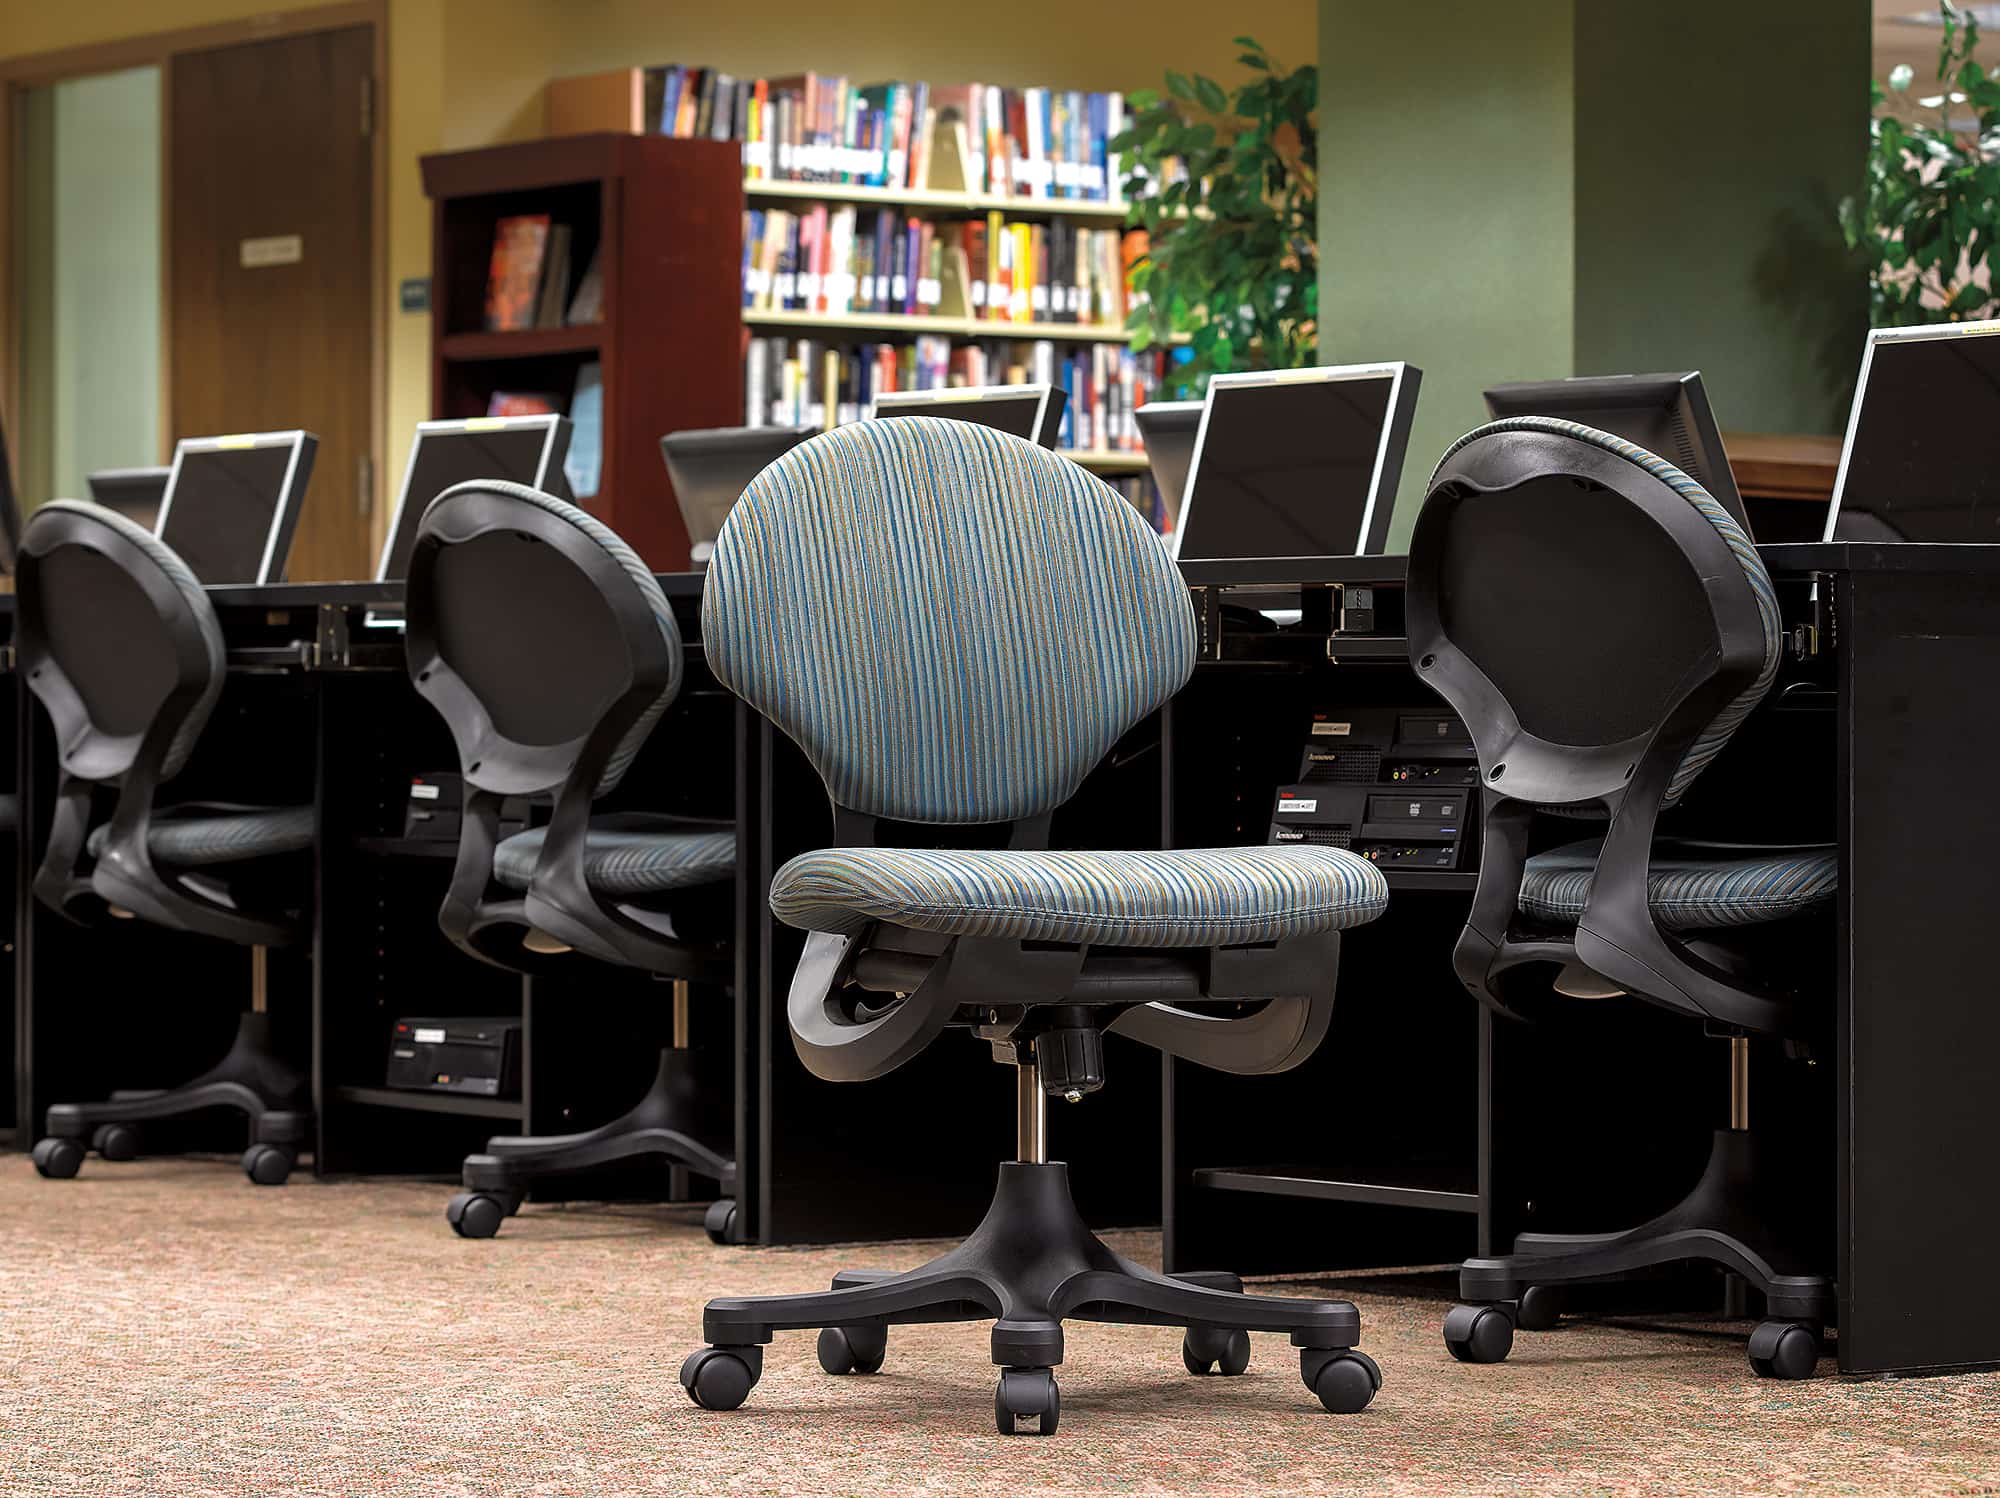 Trey, Multifunction Task Chair in a library